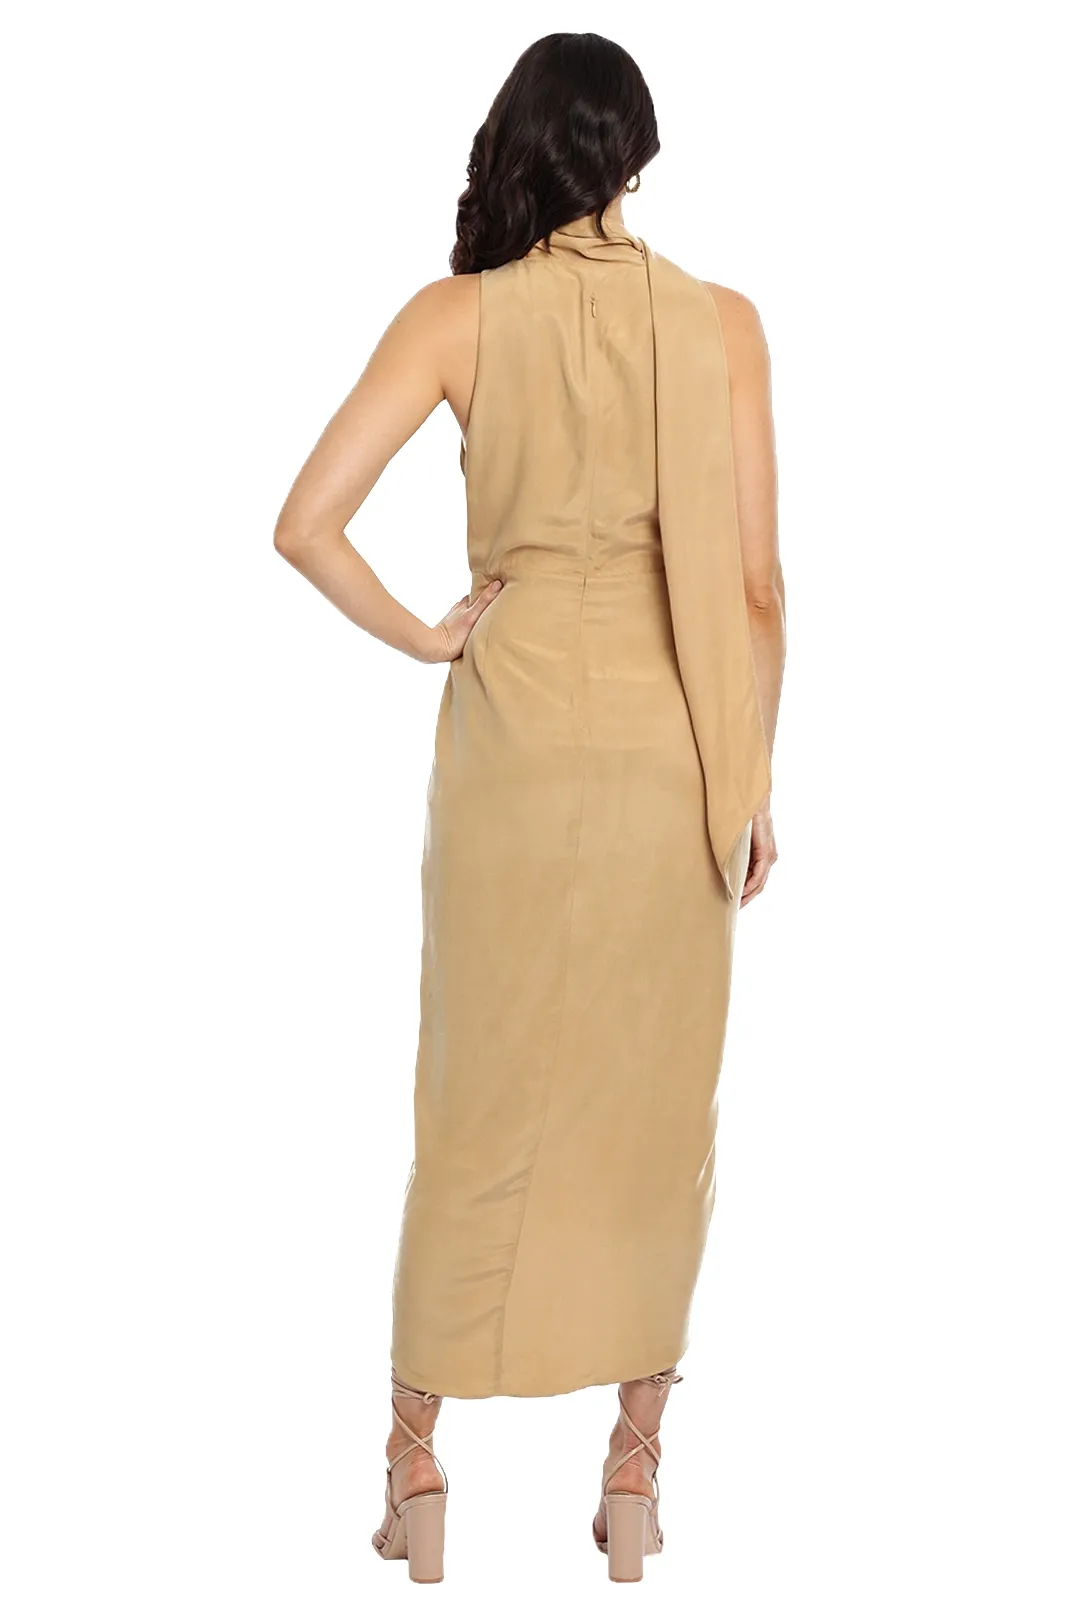 Hire nude Daleside dress for cocktail events.